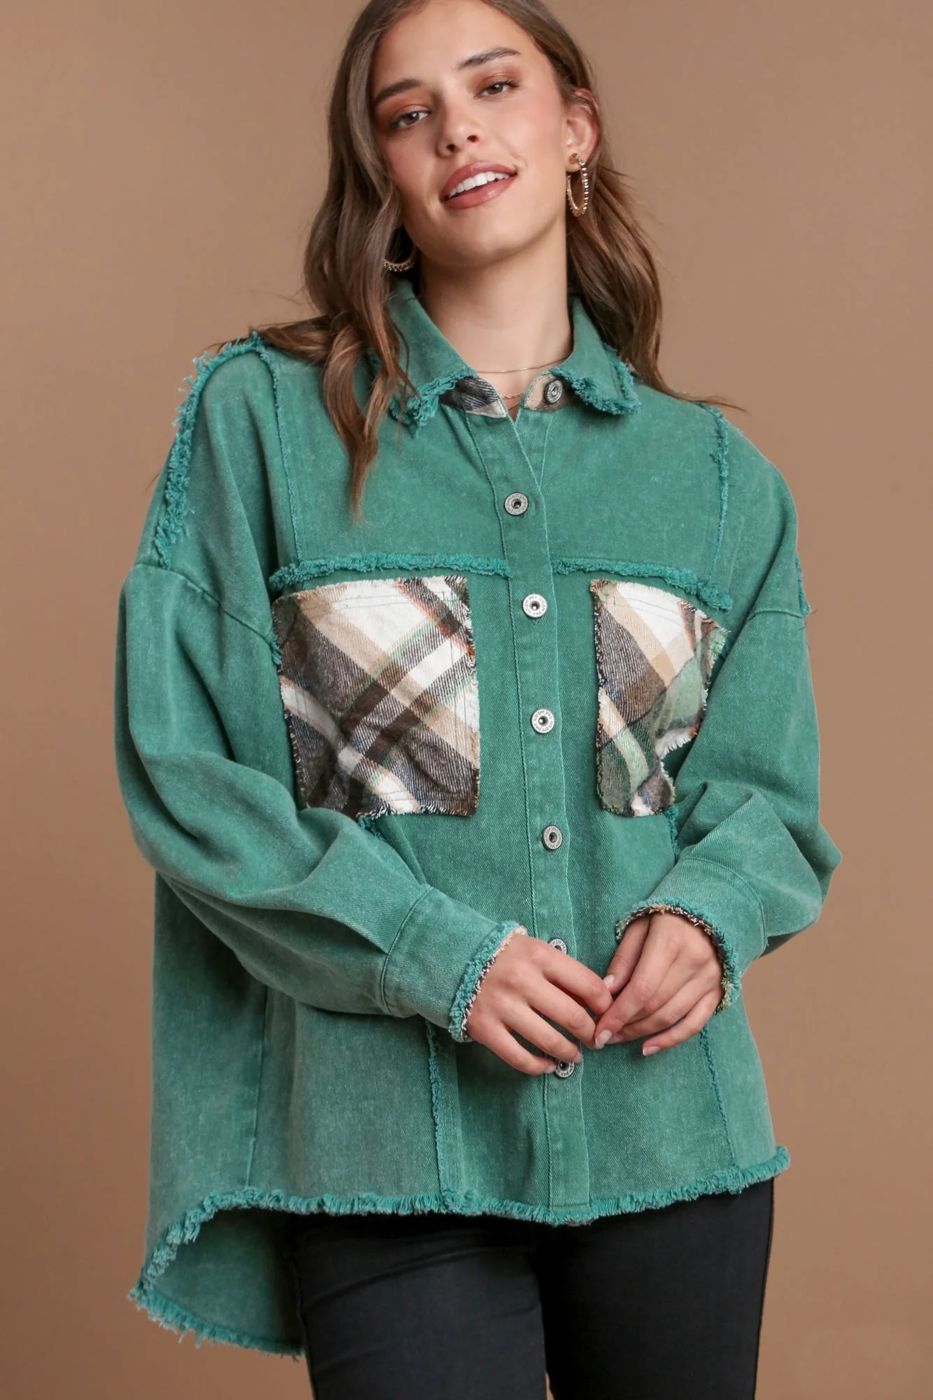 Woman wearing green denim jacket with patchwork pockets